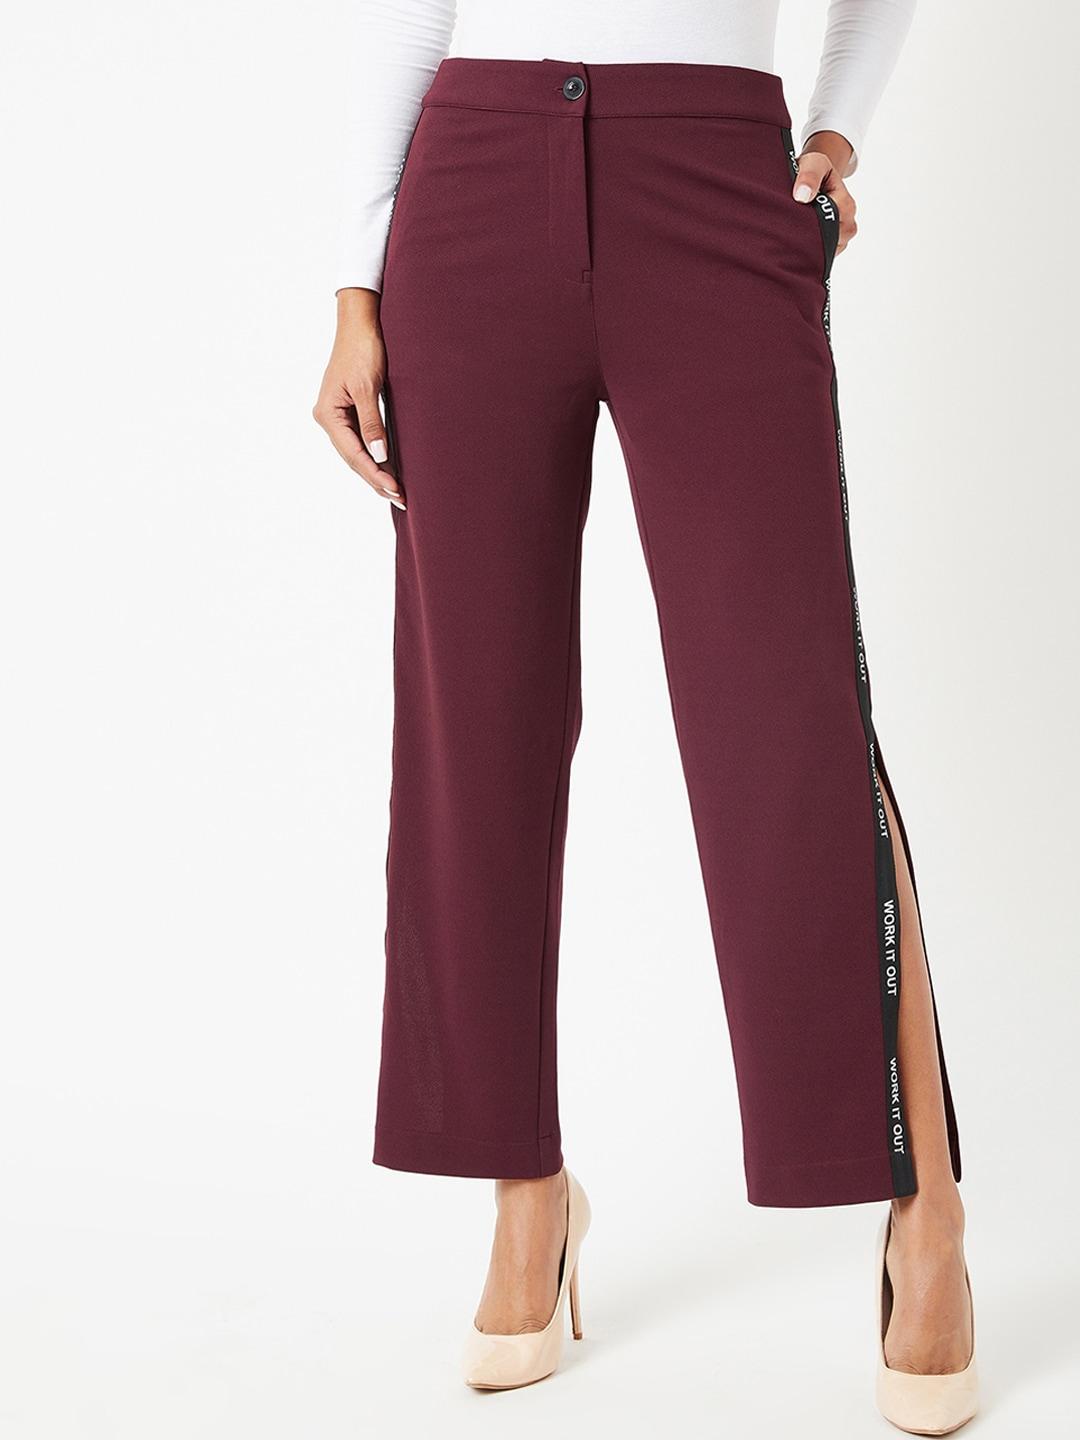 The Roadster Lifestyle Co High Waist Slitted Trouser